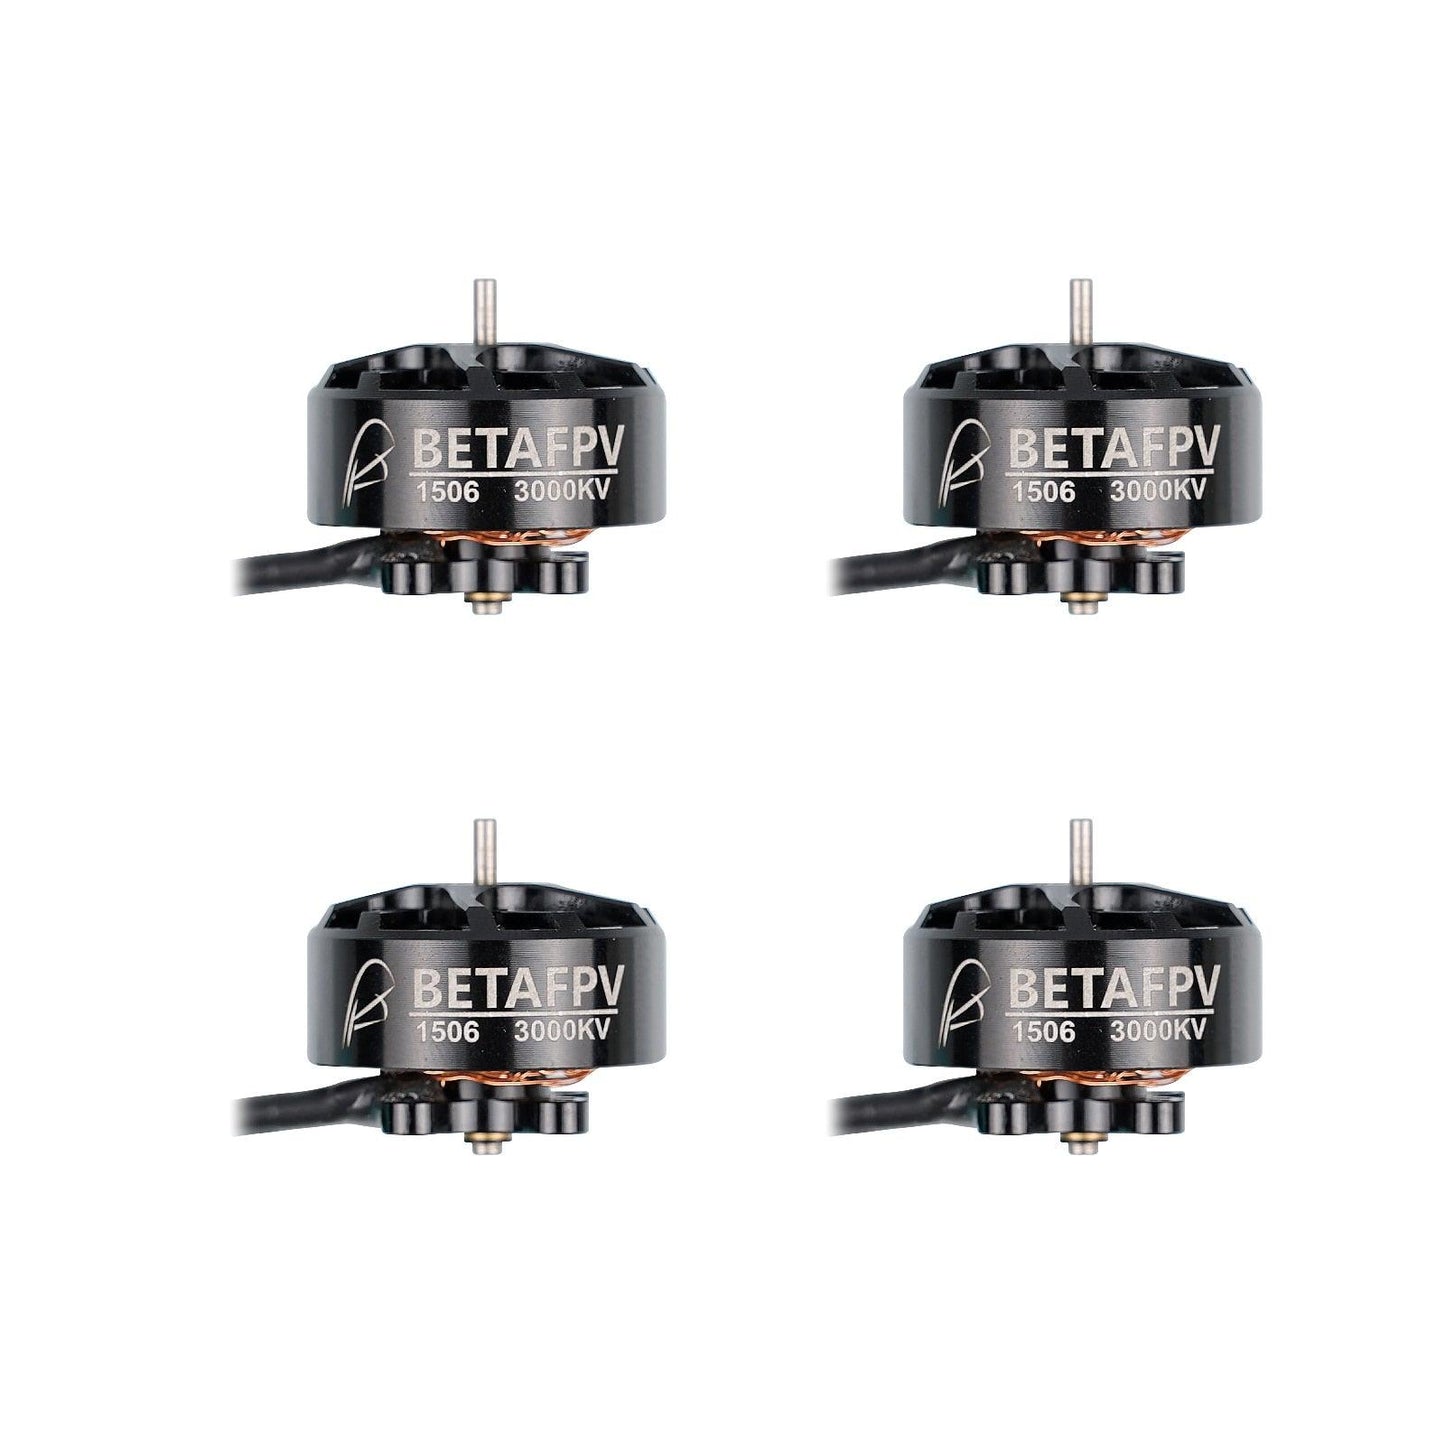 BETAFPV 1506 3000KV Brushless Motors - Pavo30 Whoop Quadcopter Racing Drone Motor Match With 20A Toothpick F4 AIO FC - RCDrone